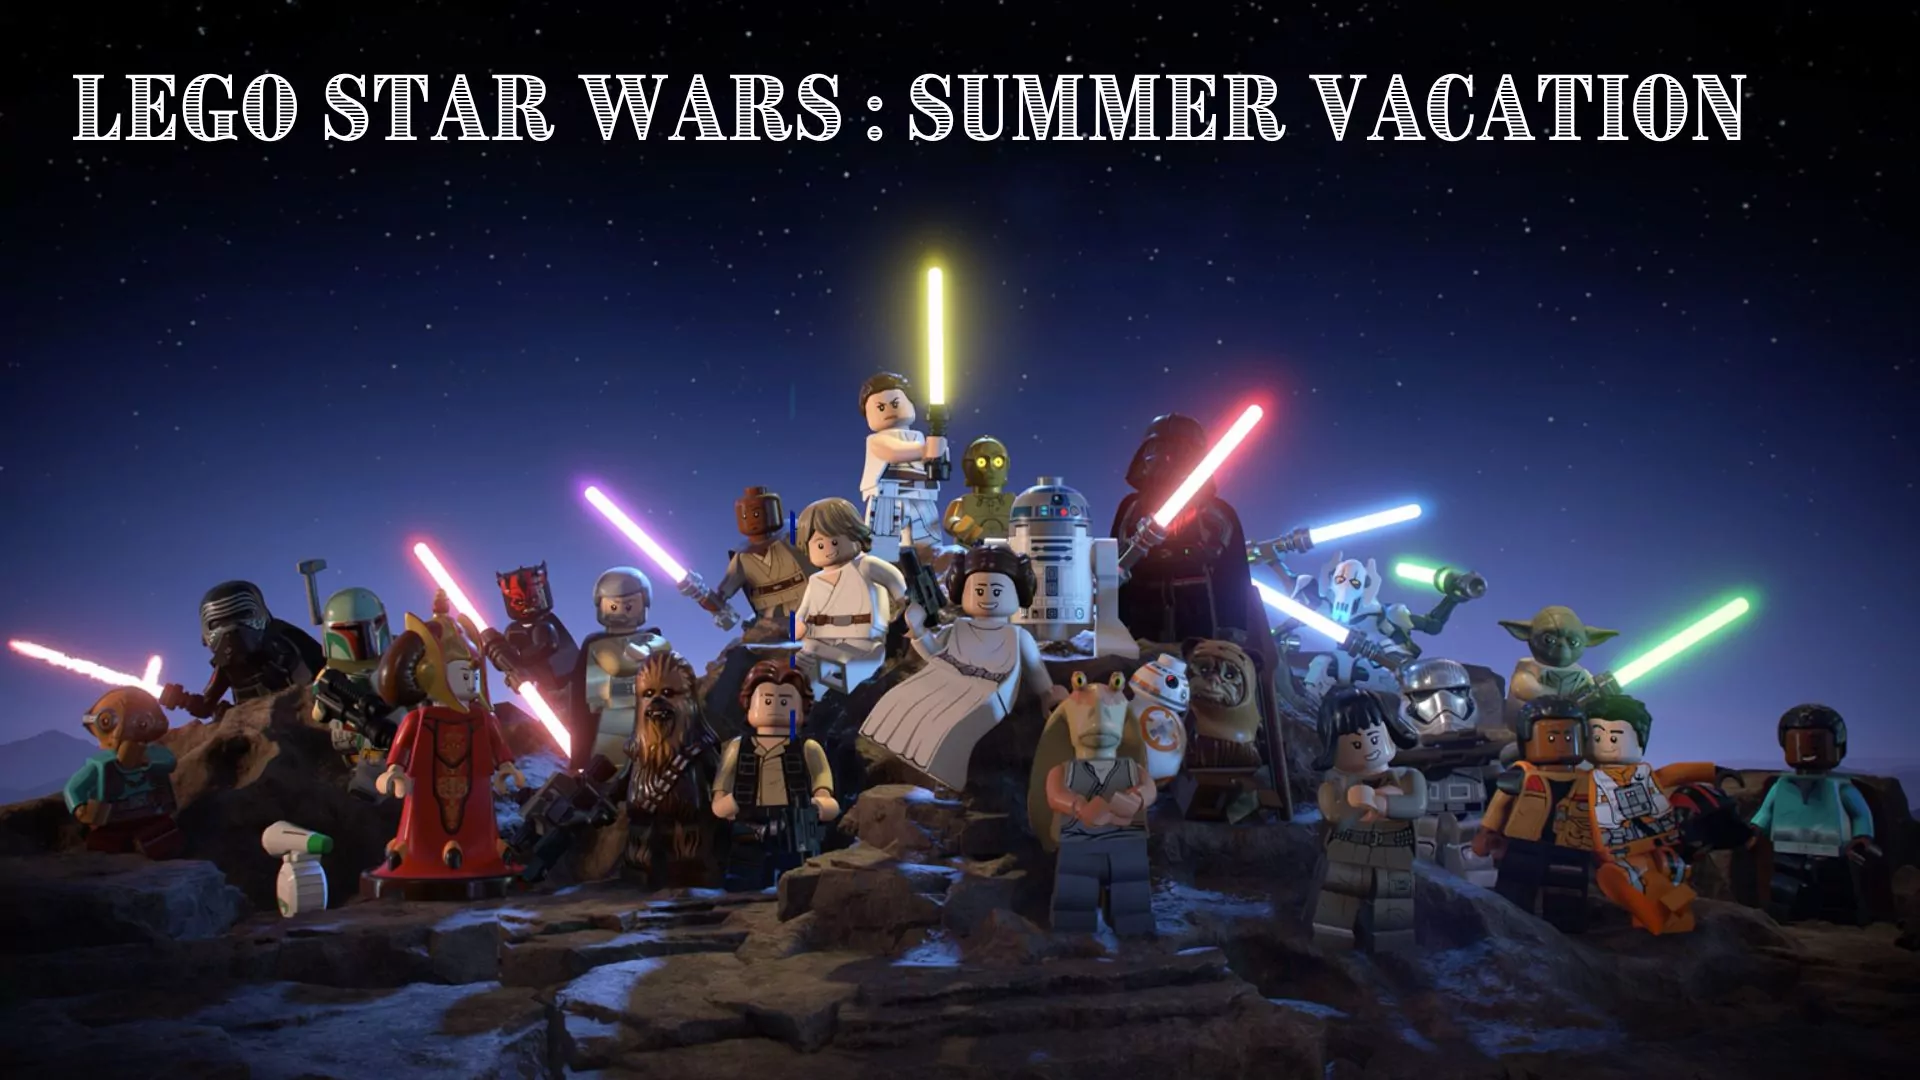 LEGO Star Wars: Summer Vacation Parents Guide | Age Rating